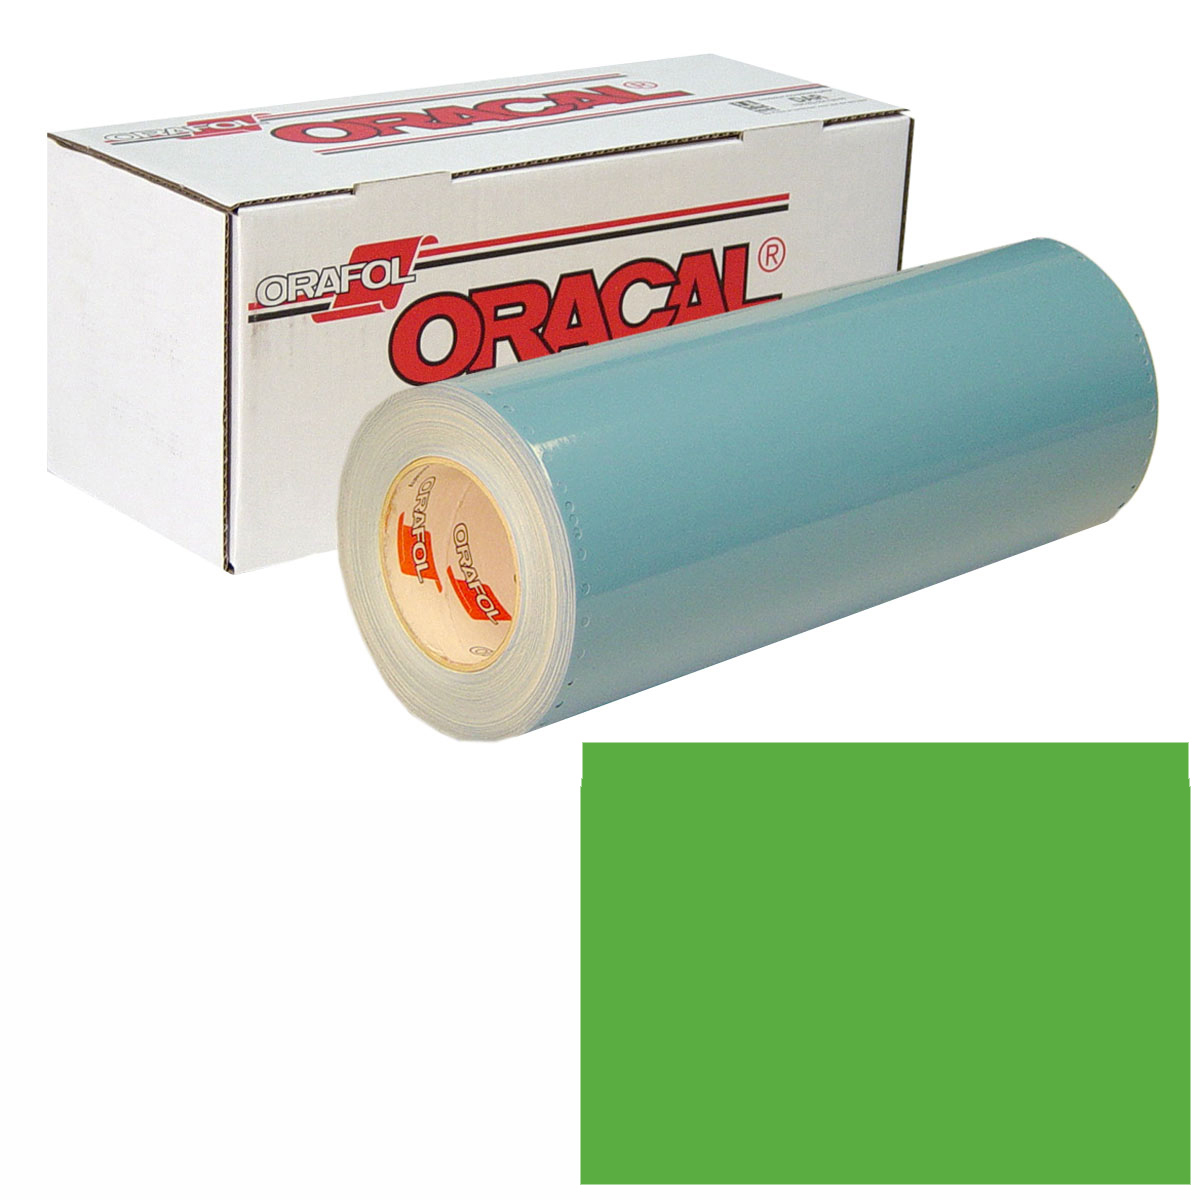 ORACAL 751 30in X 10yd 063 Lime-Tree Green